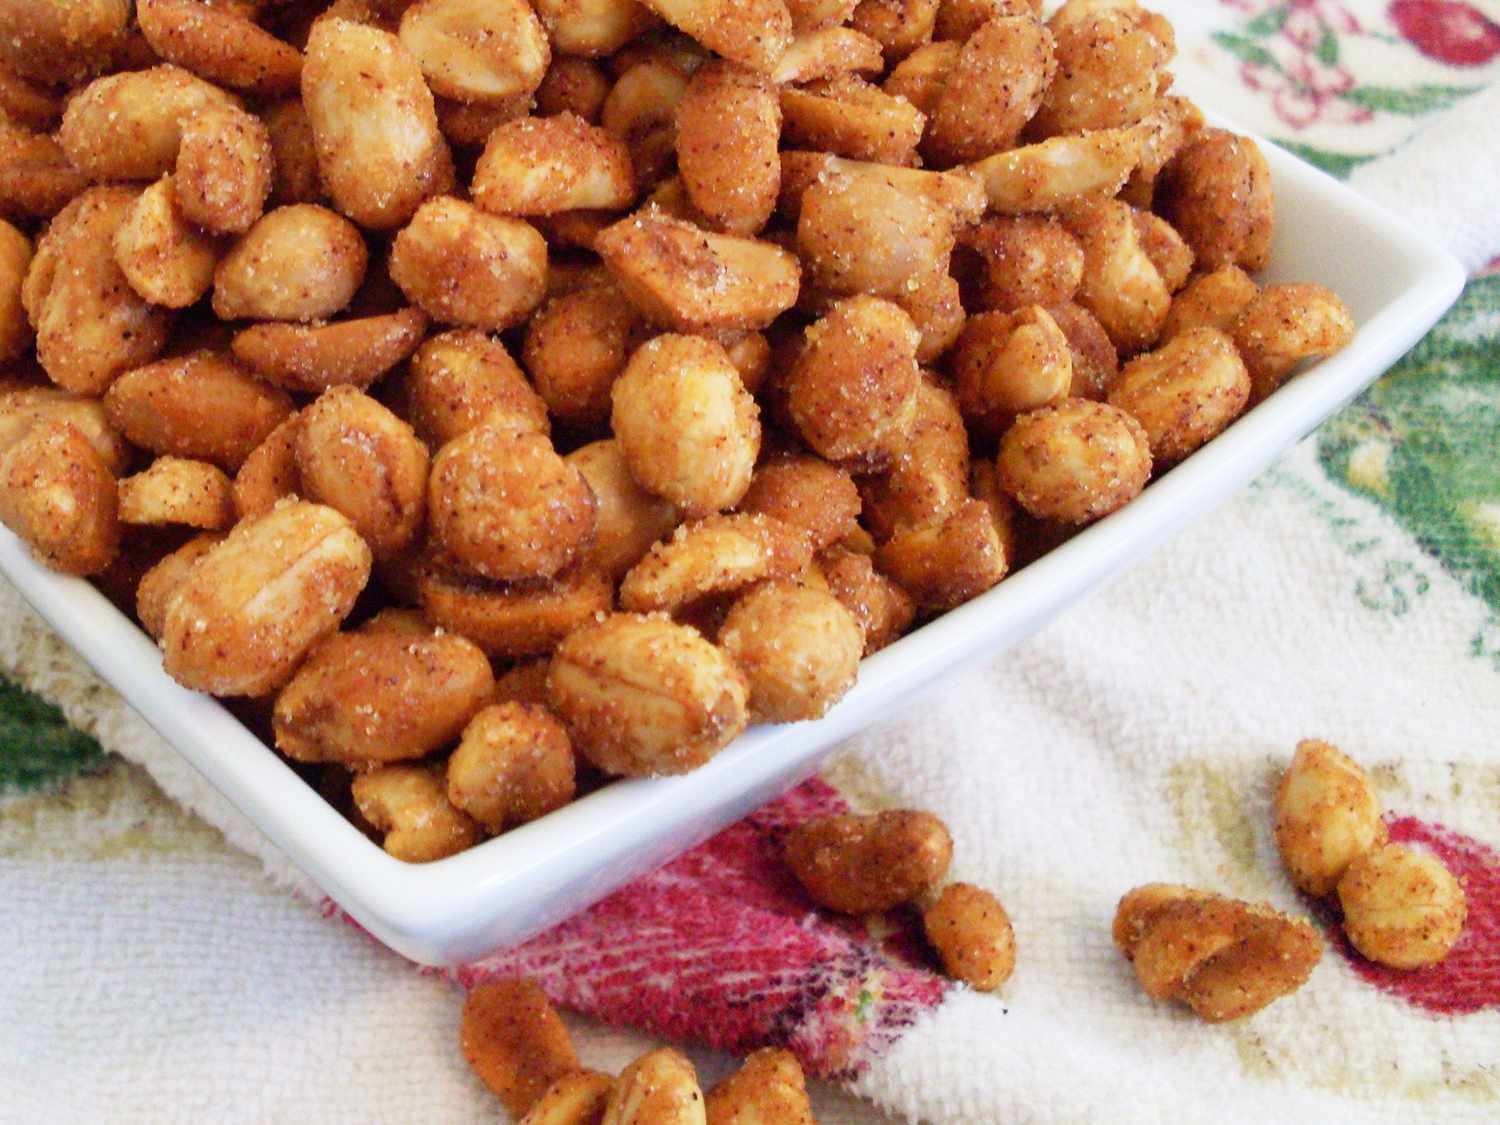 Close up view of Chipotle Honey Roasted Peanuts in a white bowl